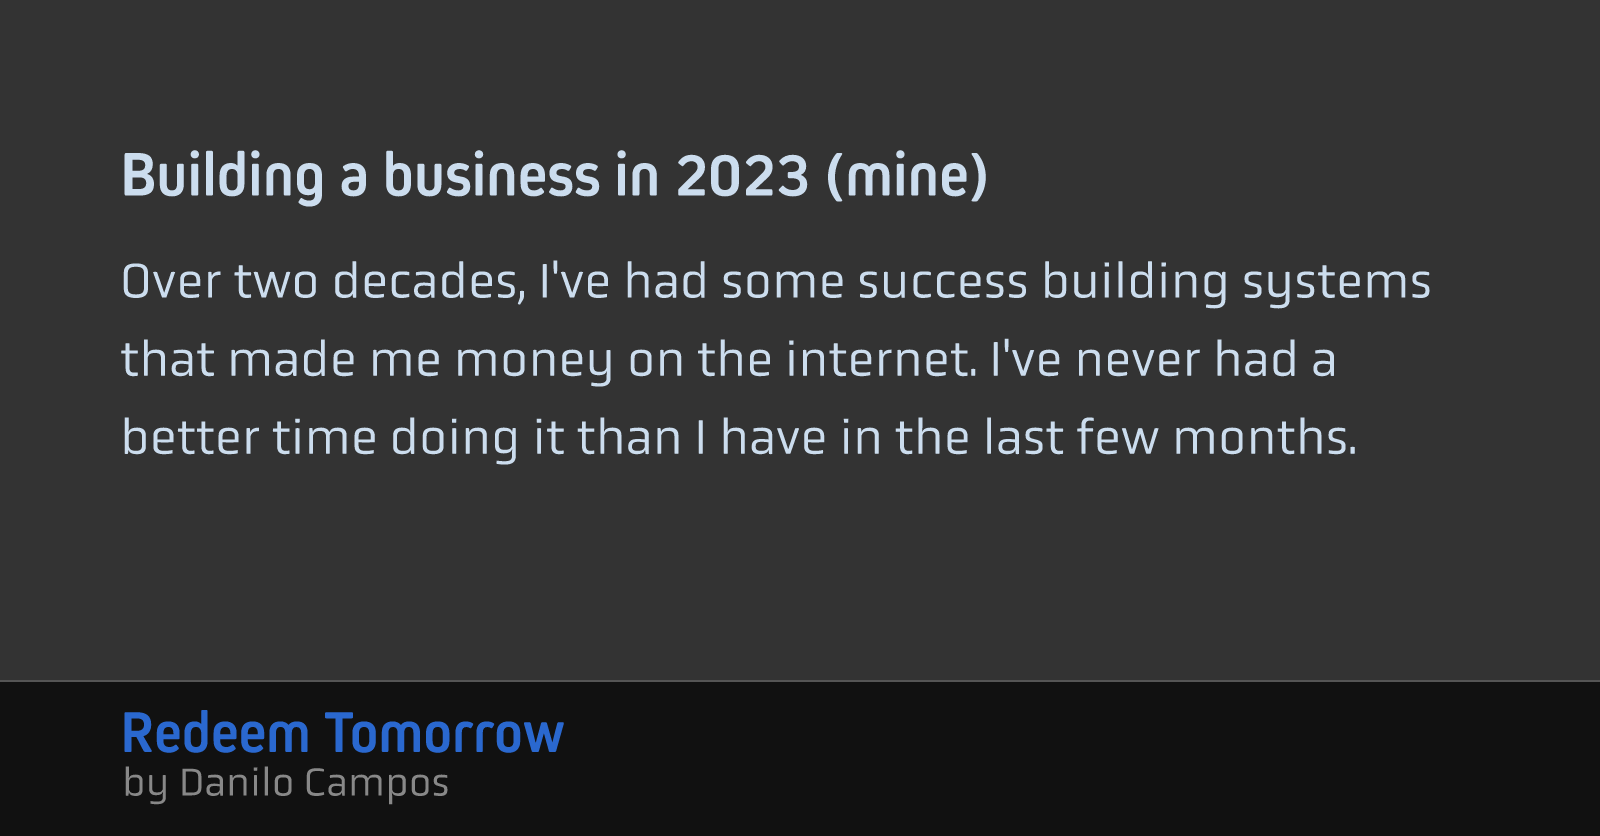 Building a business in 2023 (mine)